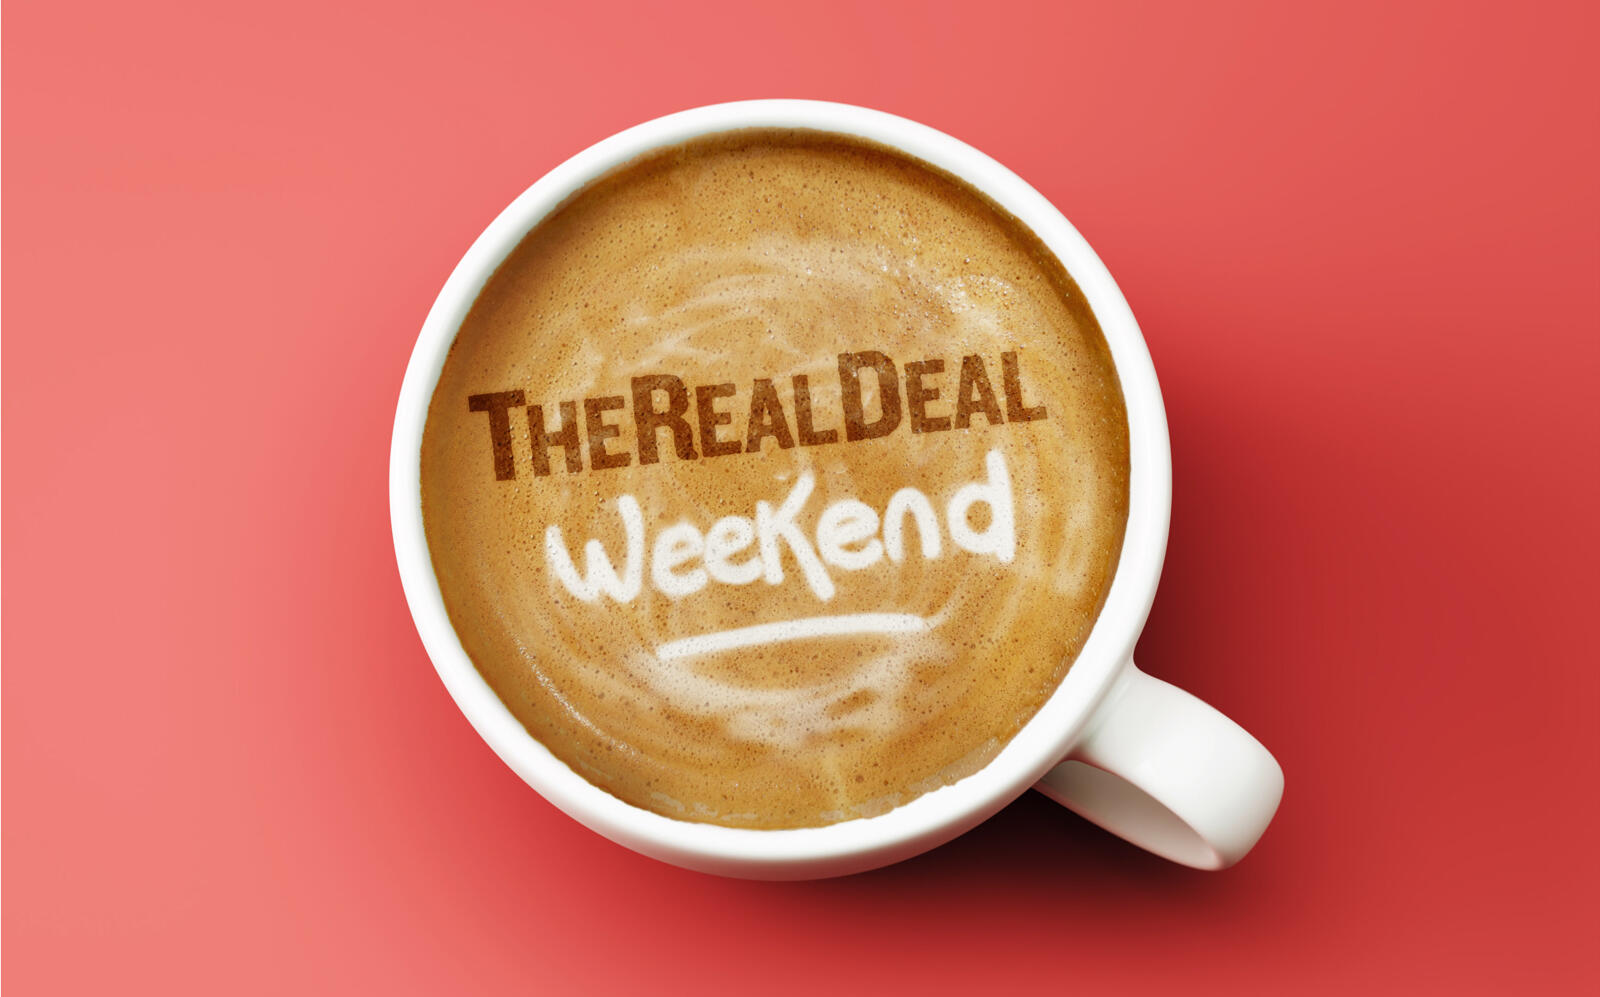 The Real Deal Weekend Edition Promo